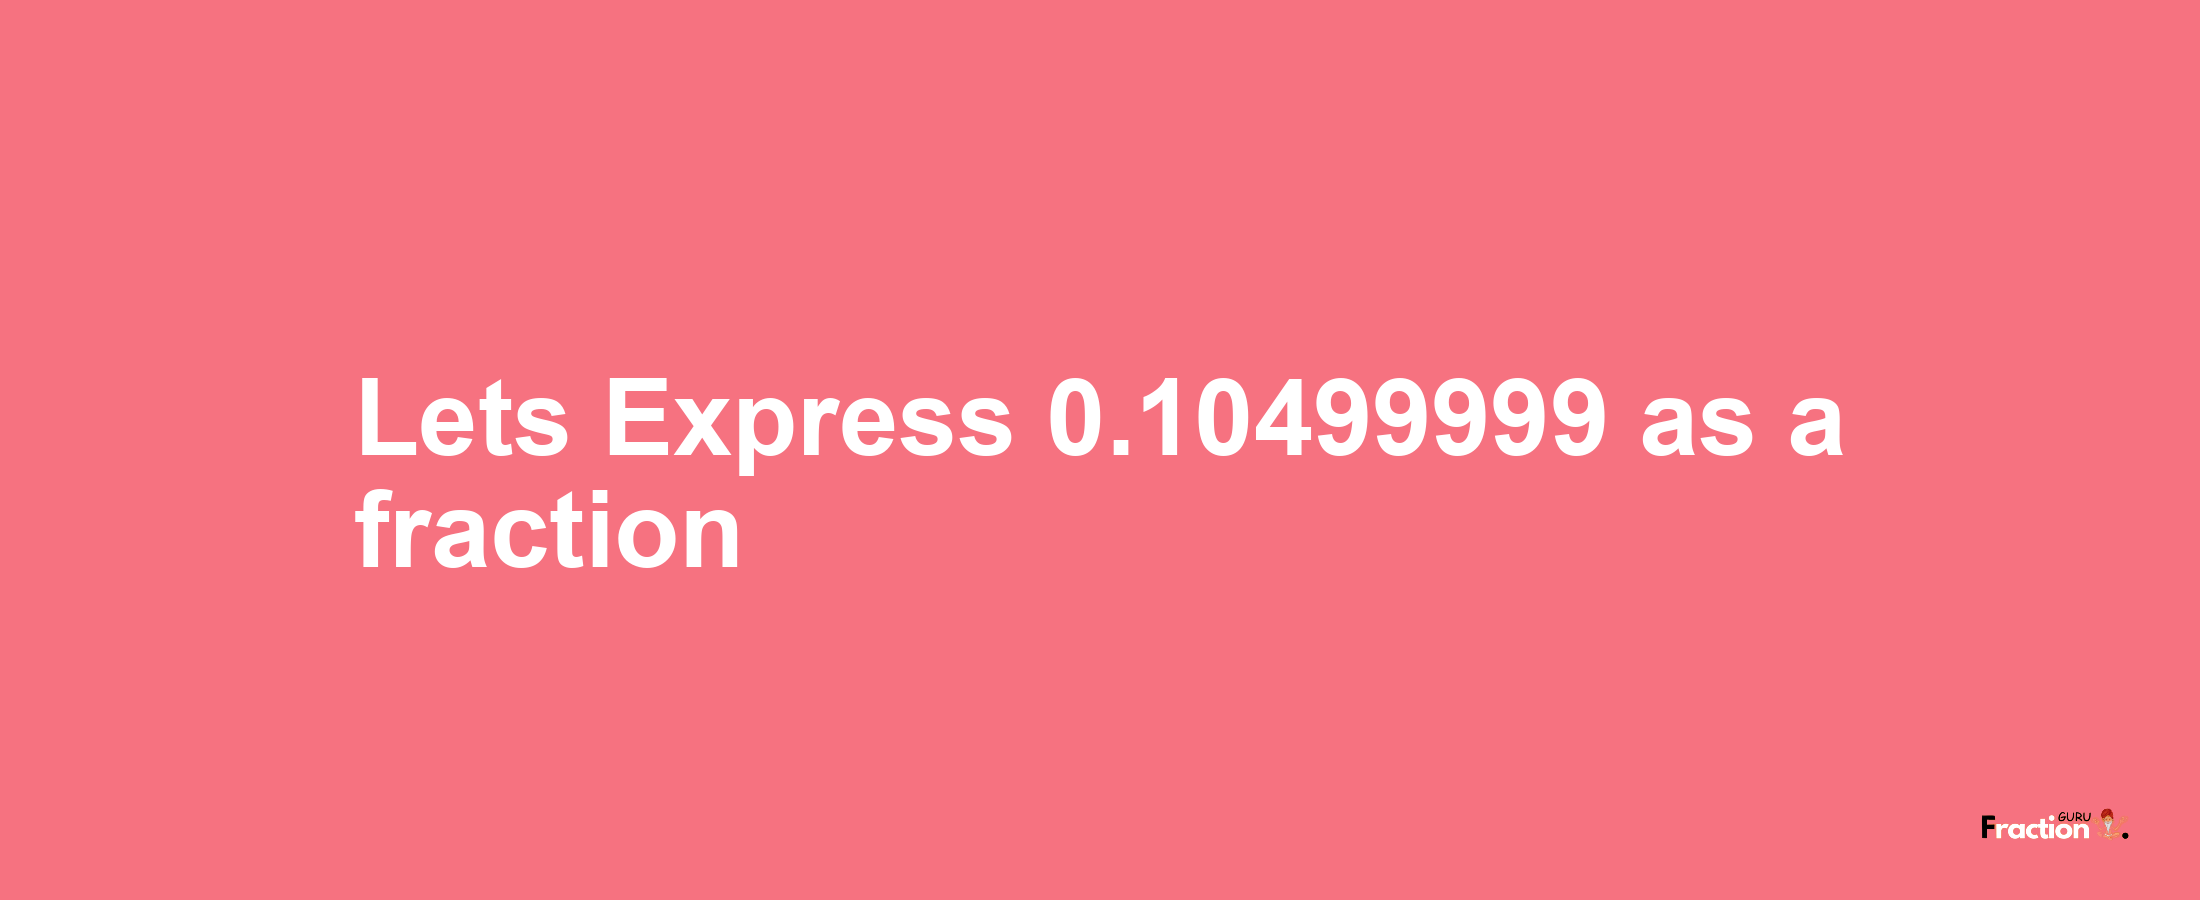 Lets Express 0.10499999 as afraction